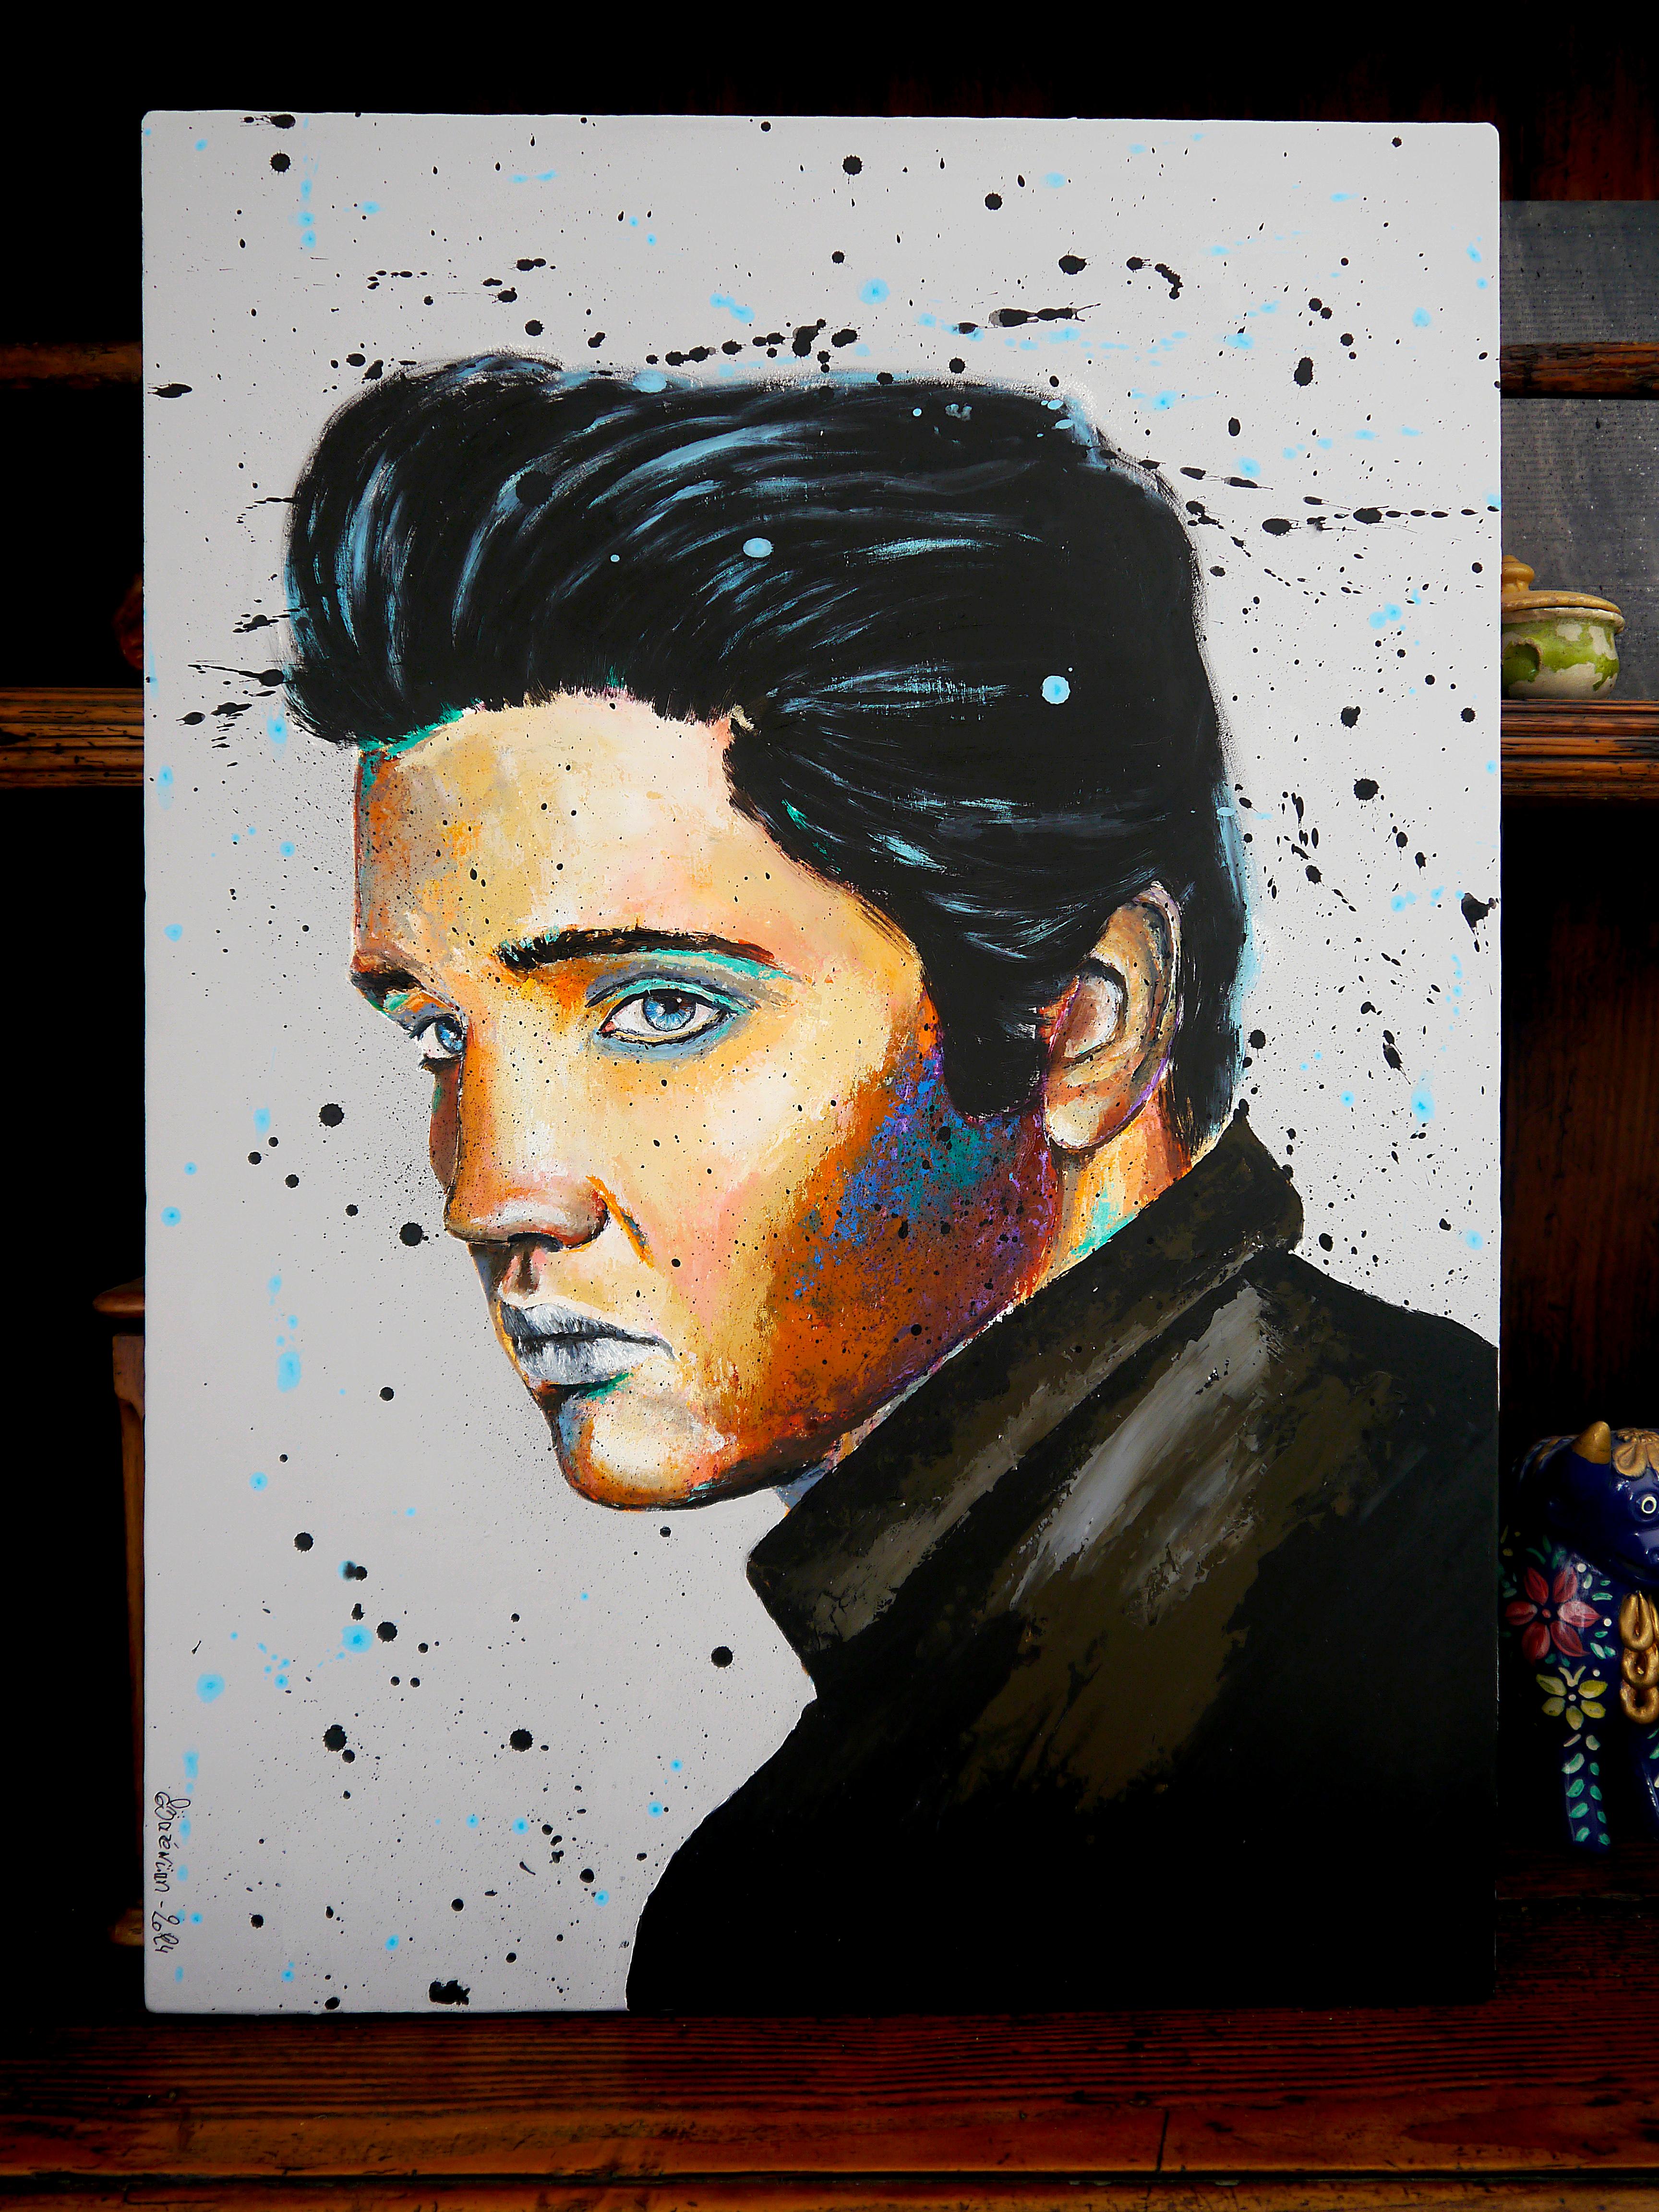 Continental Elvis

Portrait of the king _ Elvis Presley.

Structural analysis:
Such as Impressionist painting,   the subject is firstly a study of light on human body, creating high contrasts on the skin. 

Technique: oil, acrylic, and ink on 3D